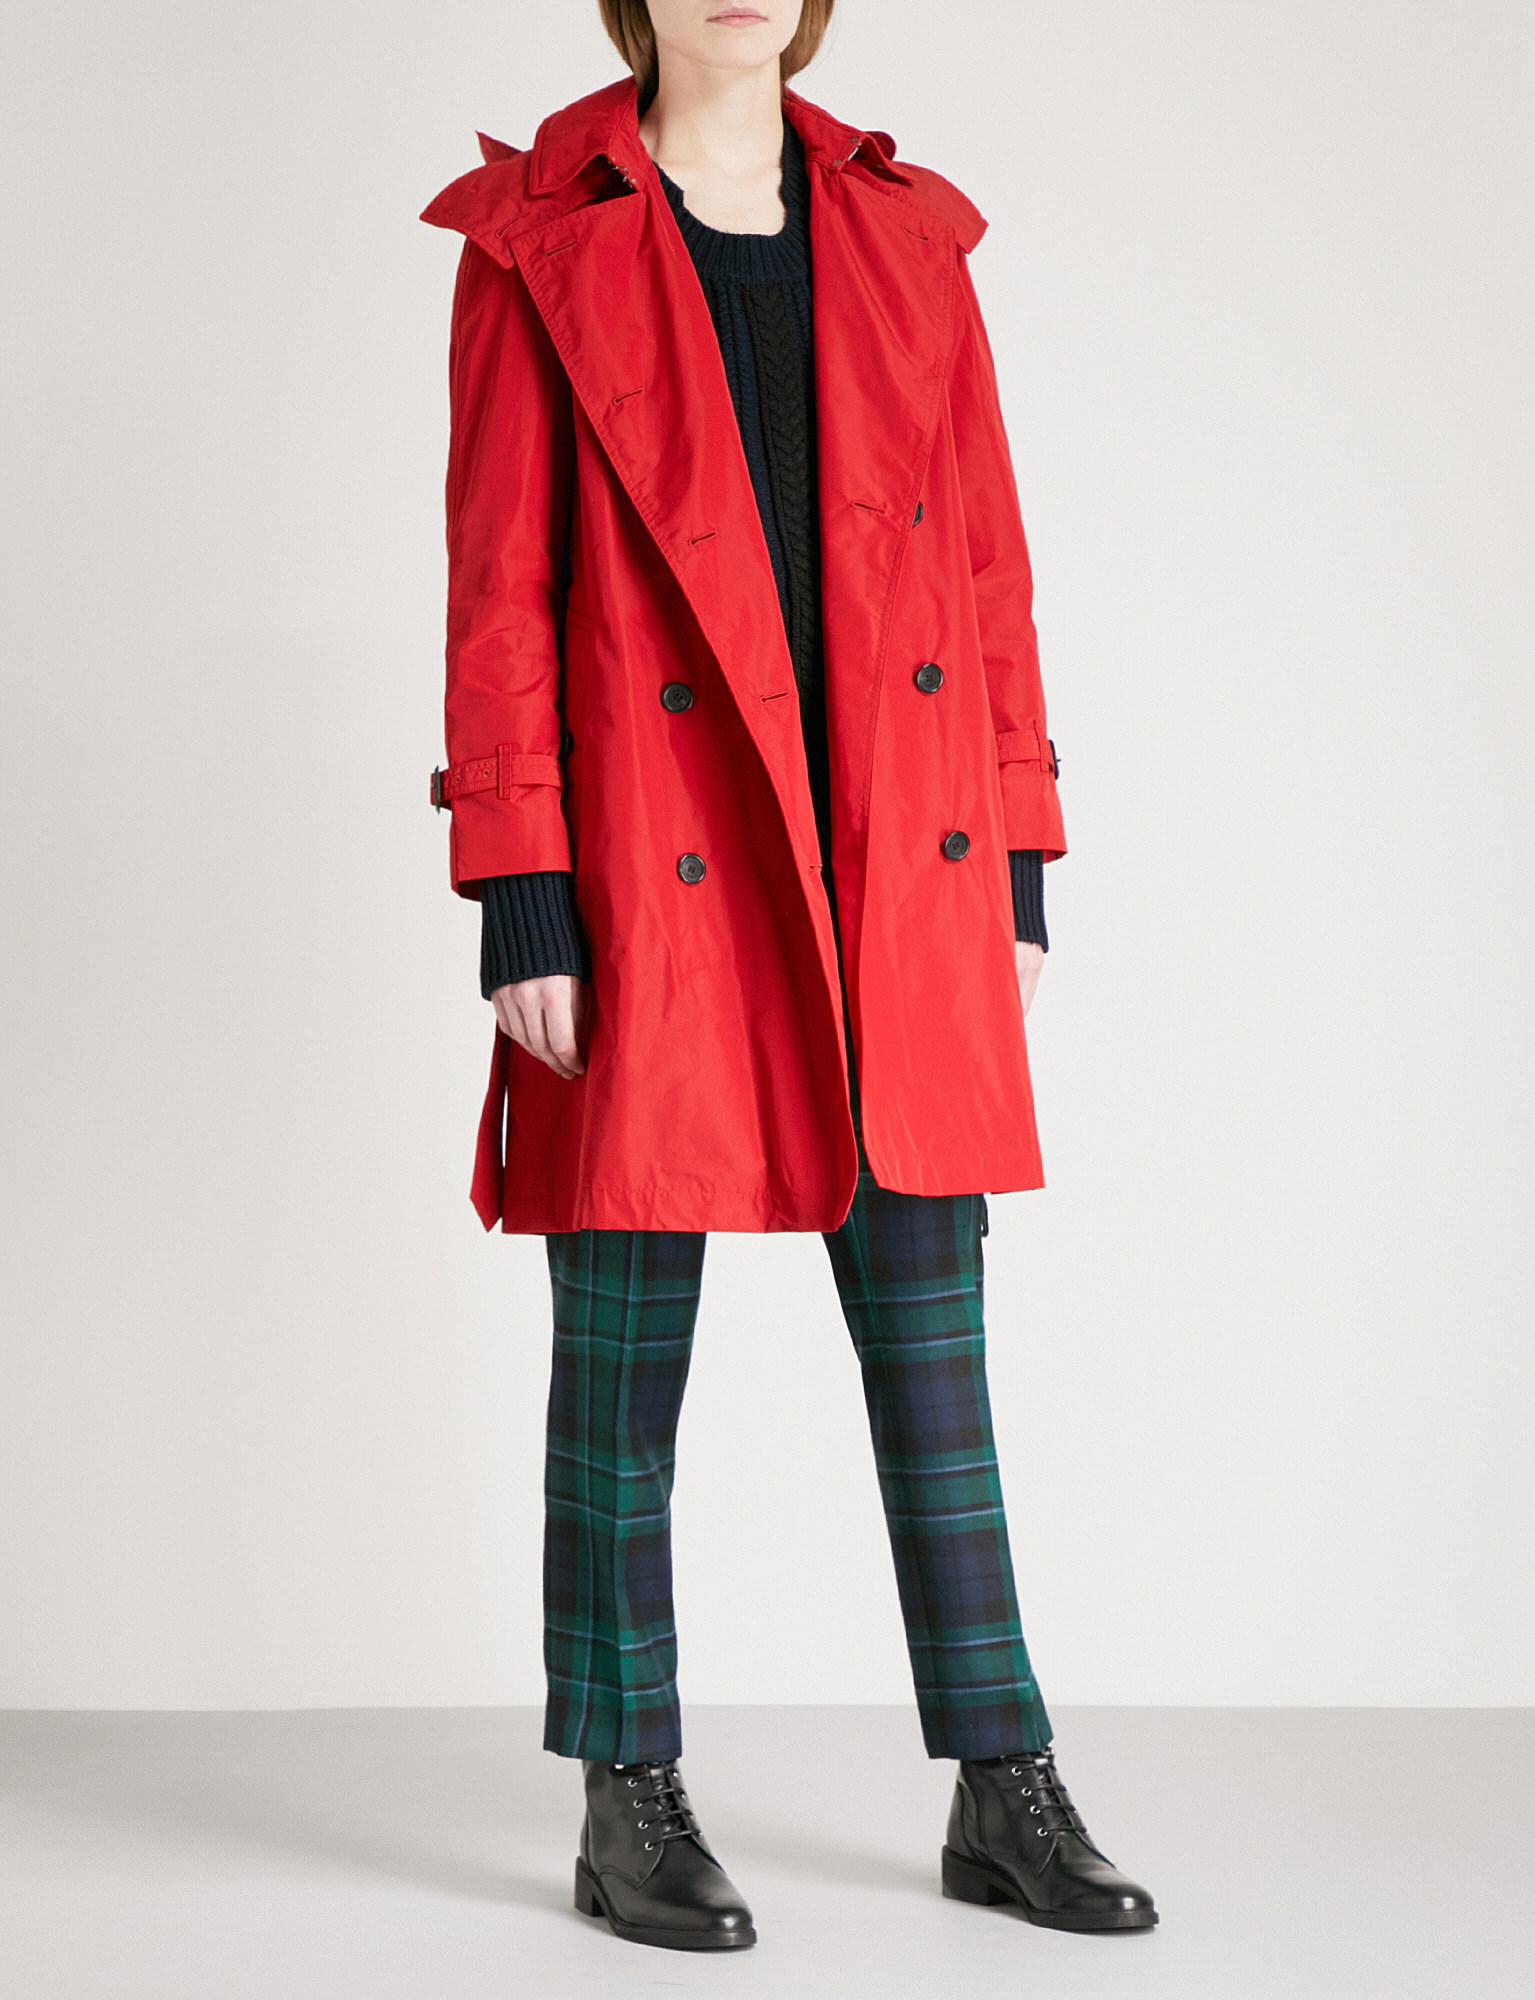 Burberry Cotton Amberford Shell Trench Coat in Military Red (Red) - Lyst